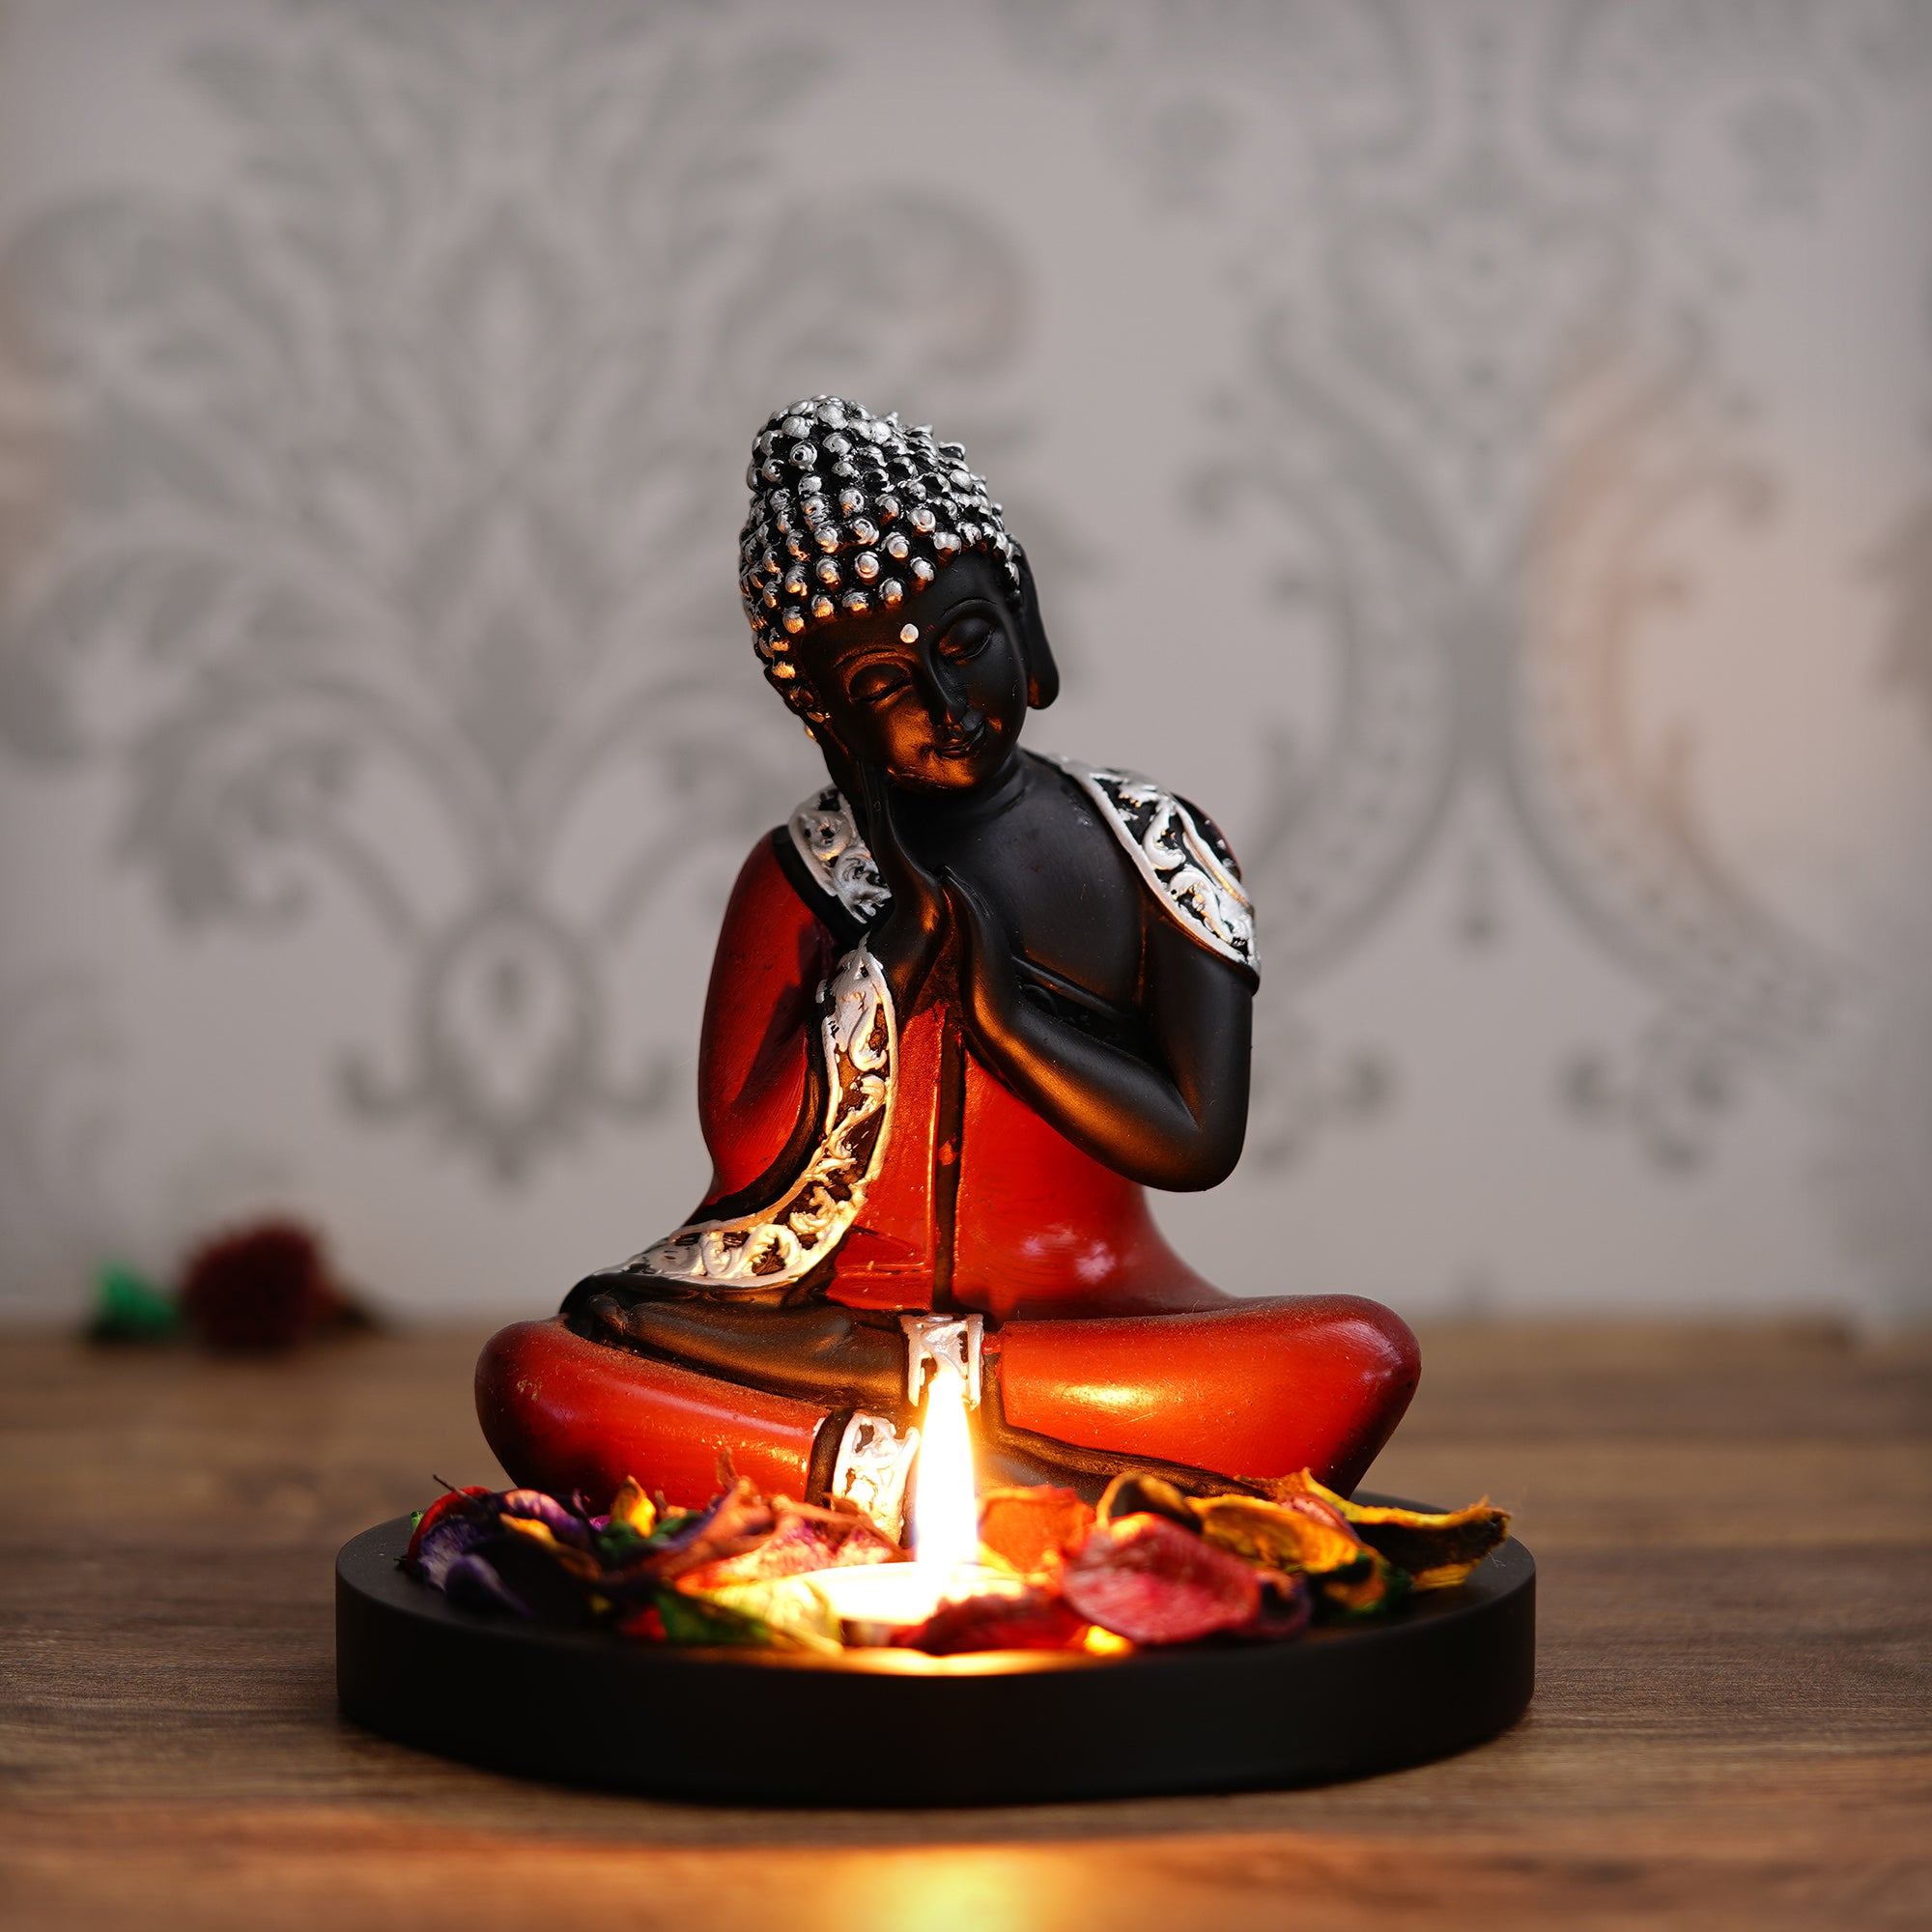 Polyresin Antique Finish Handcrafted Thinking Buddha Statue with Wooden Base, Fragranced Petals and Tealight (Red, Black and Silver) 1